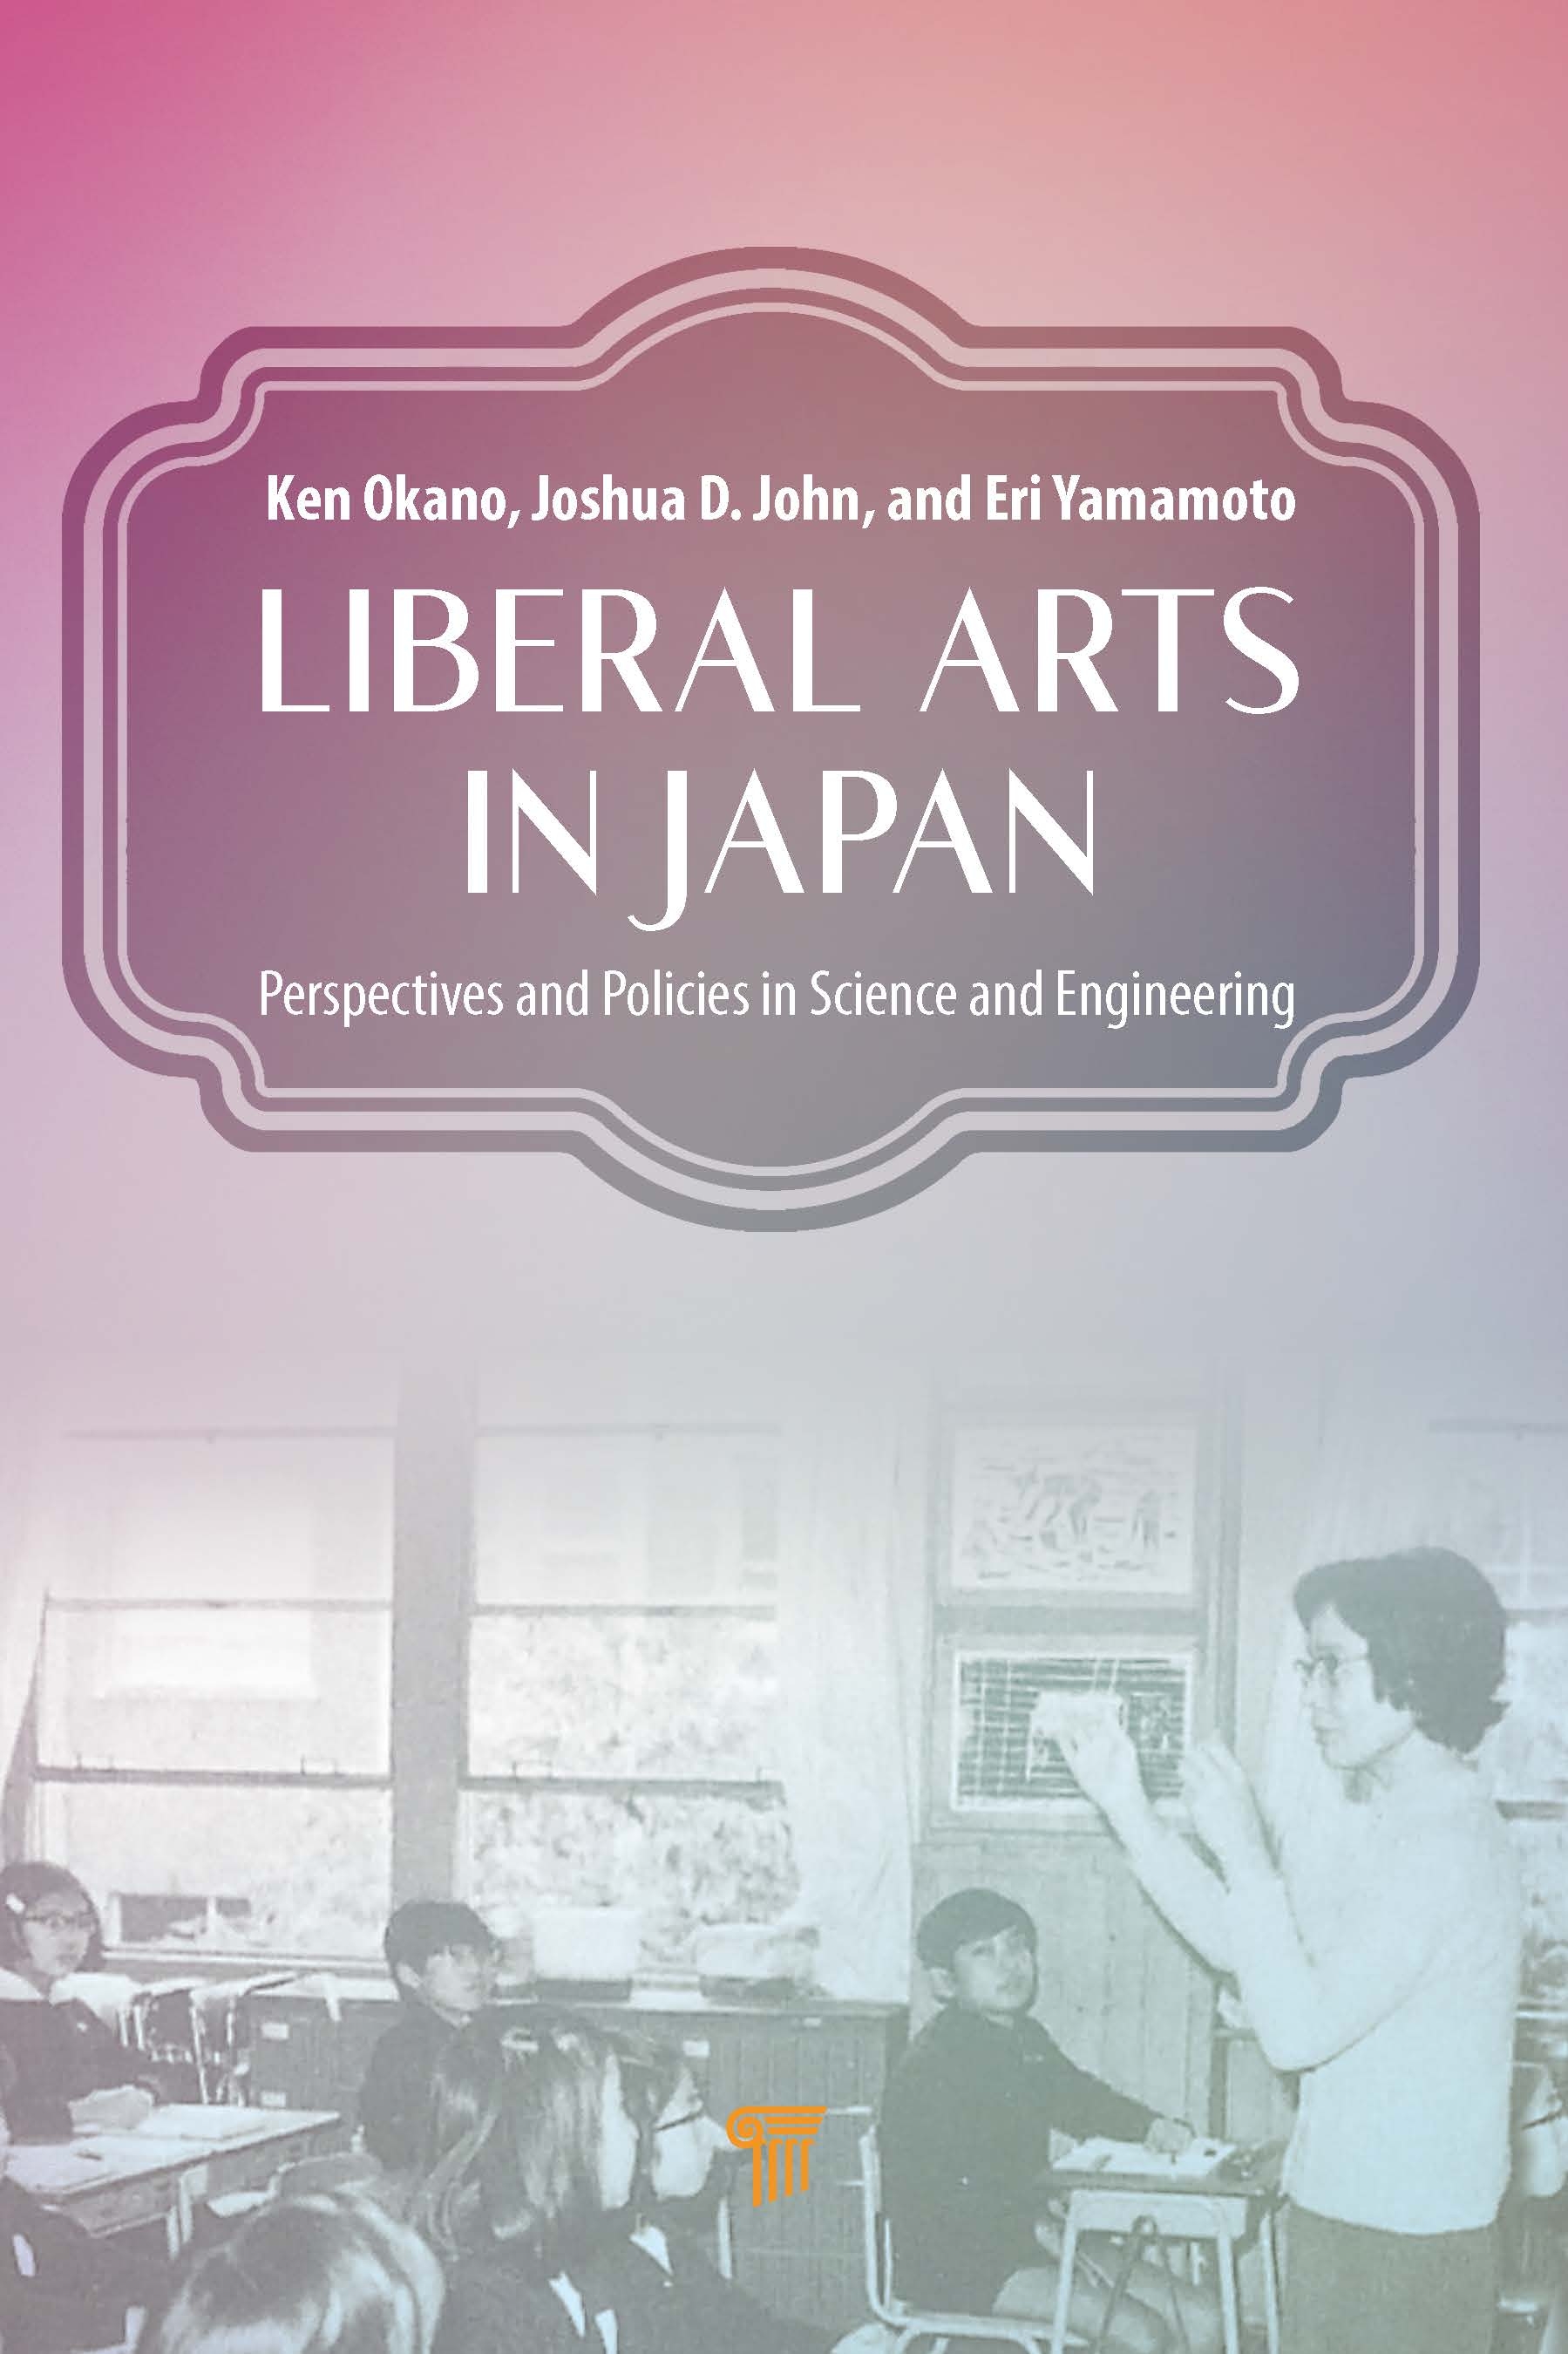 Liberal Arts in Japan: Perspectives and Policies in Science and Engineering